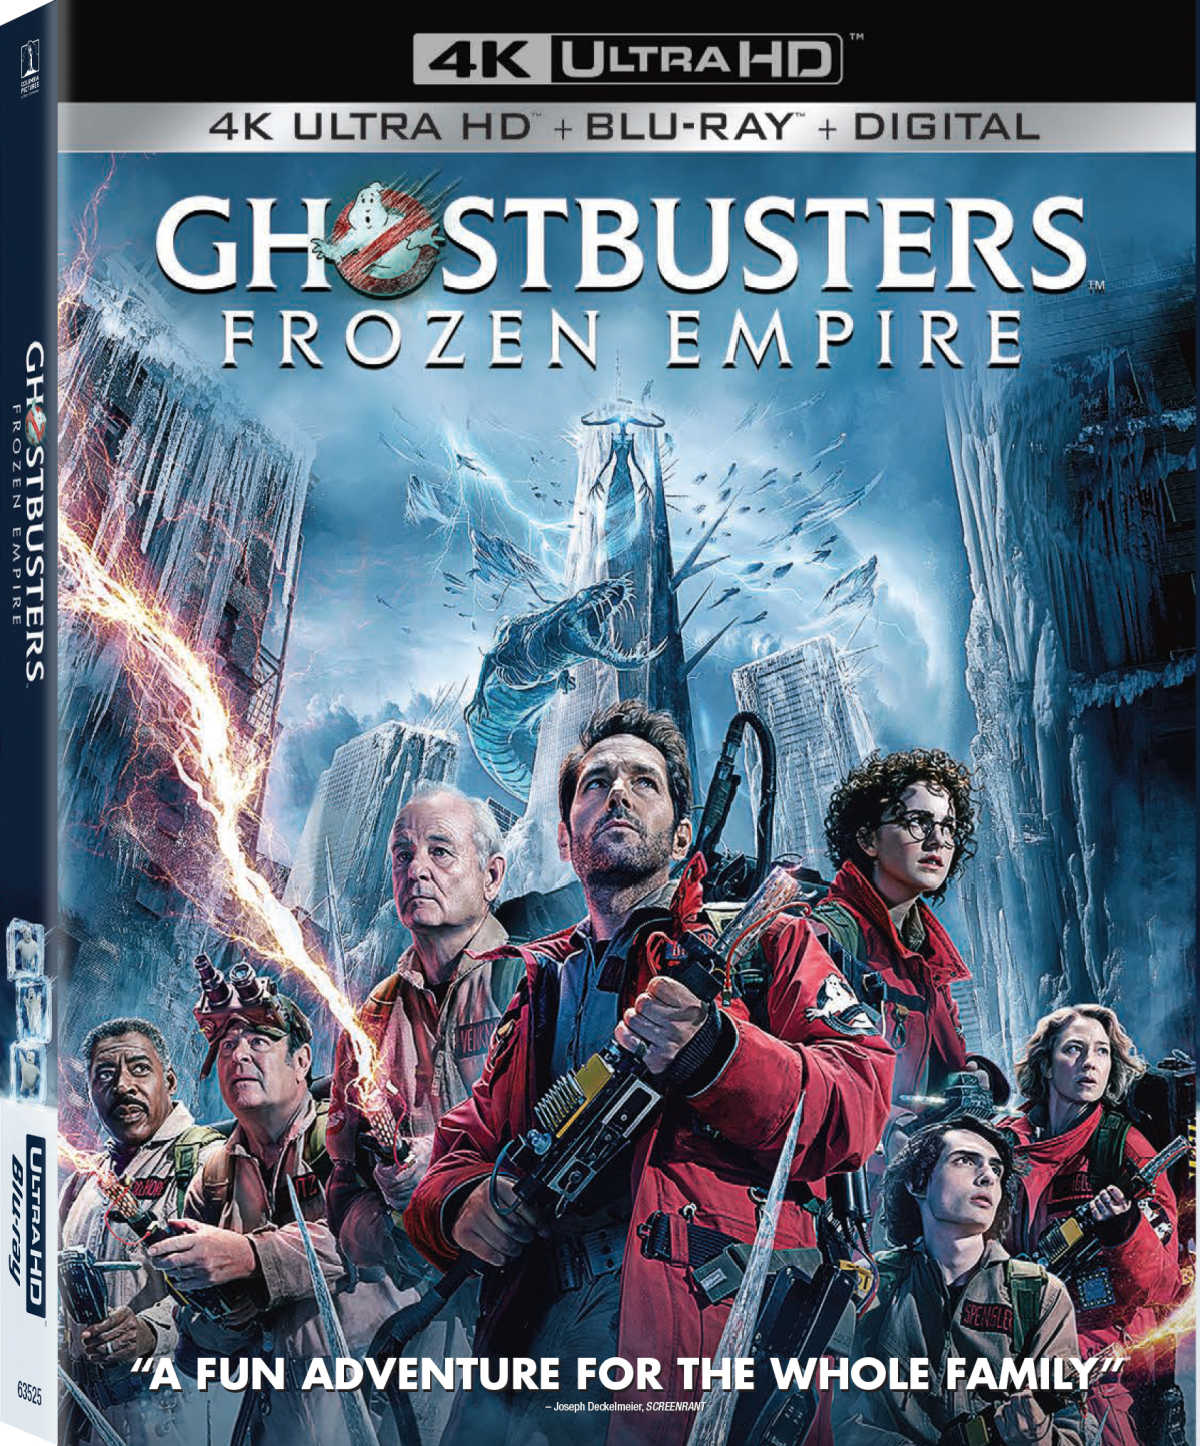 Relive the proton-packin' fun with Ghostbusters Frozen Empire, now available for home viewing! This spooky sequel captures the charm of the original while spooktacularly entertaining a whole new generation.